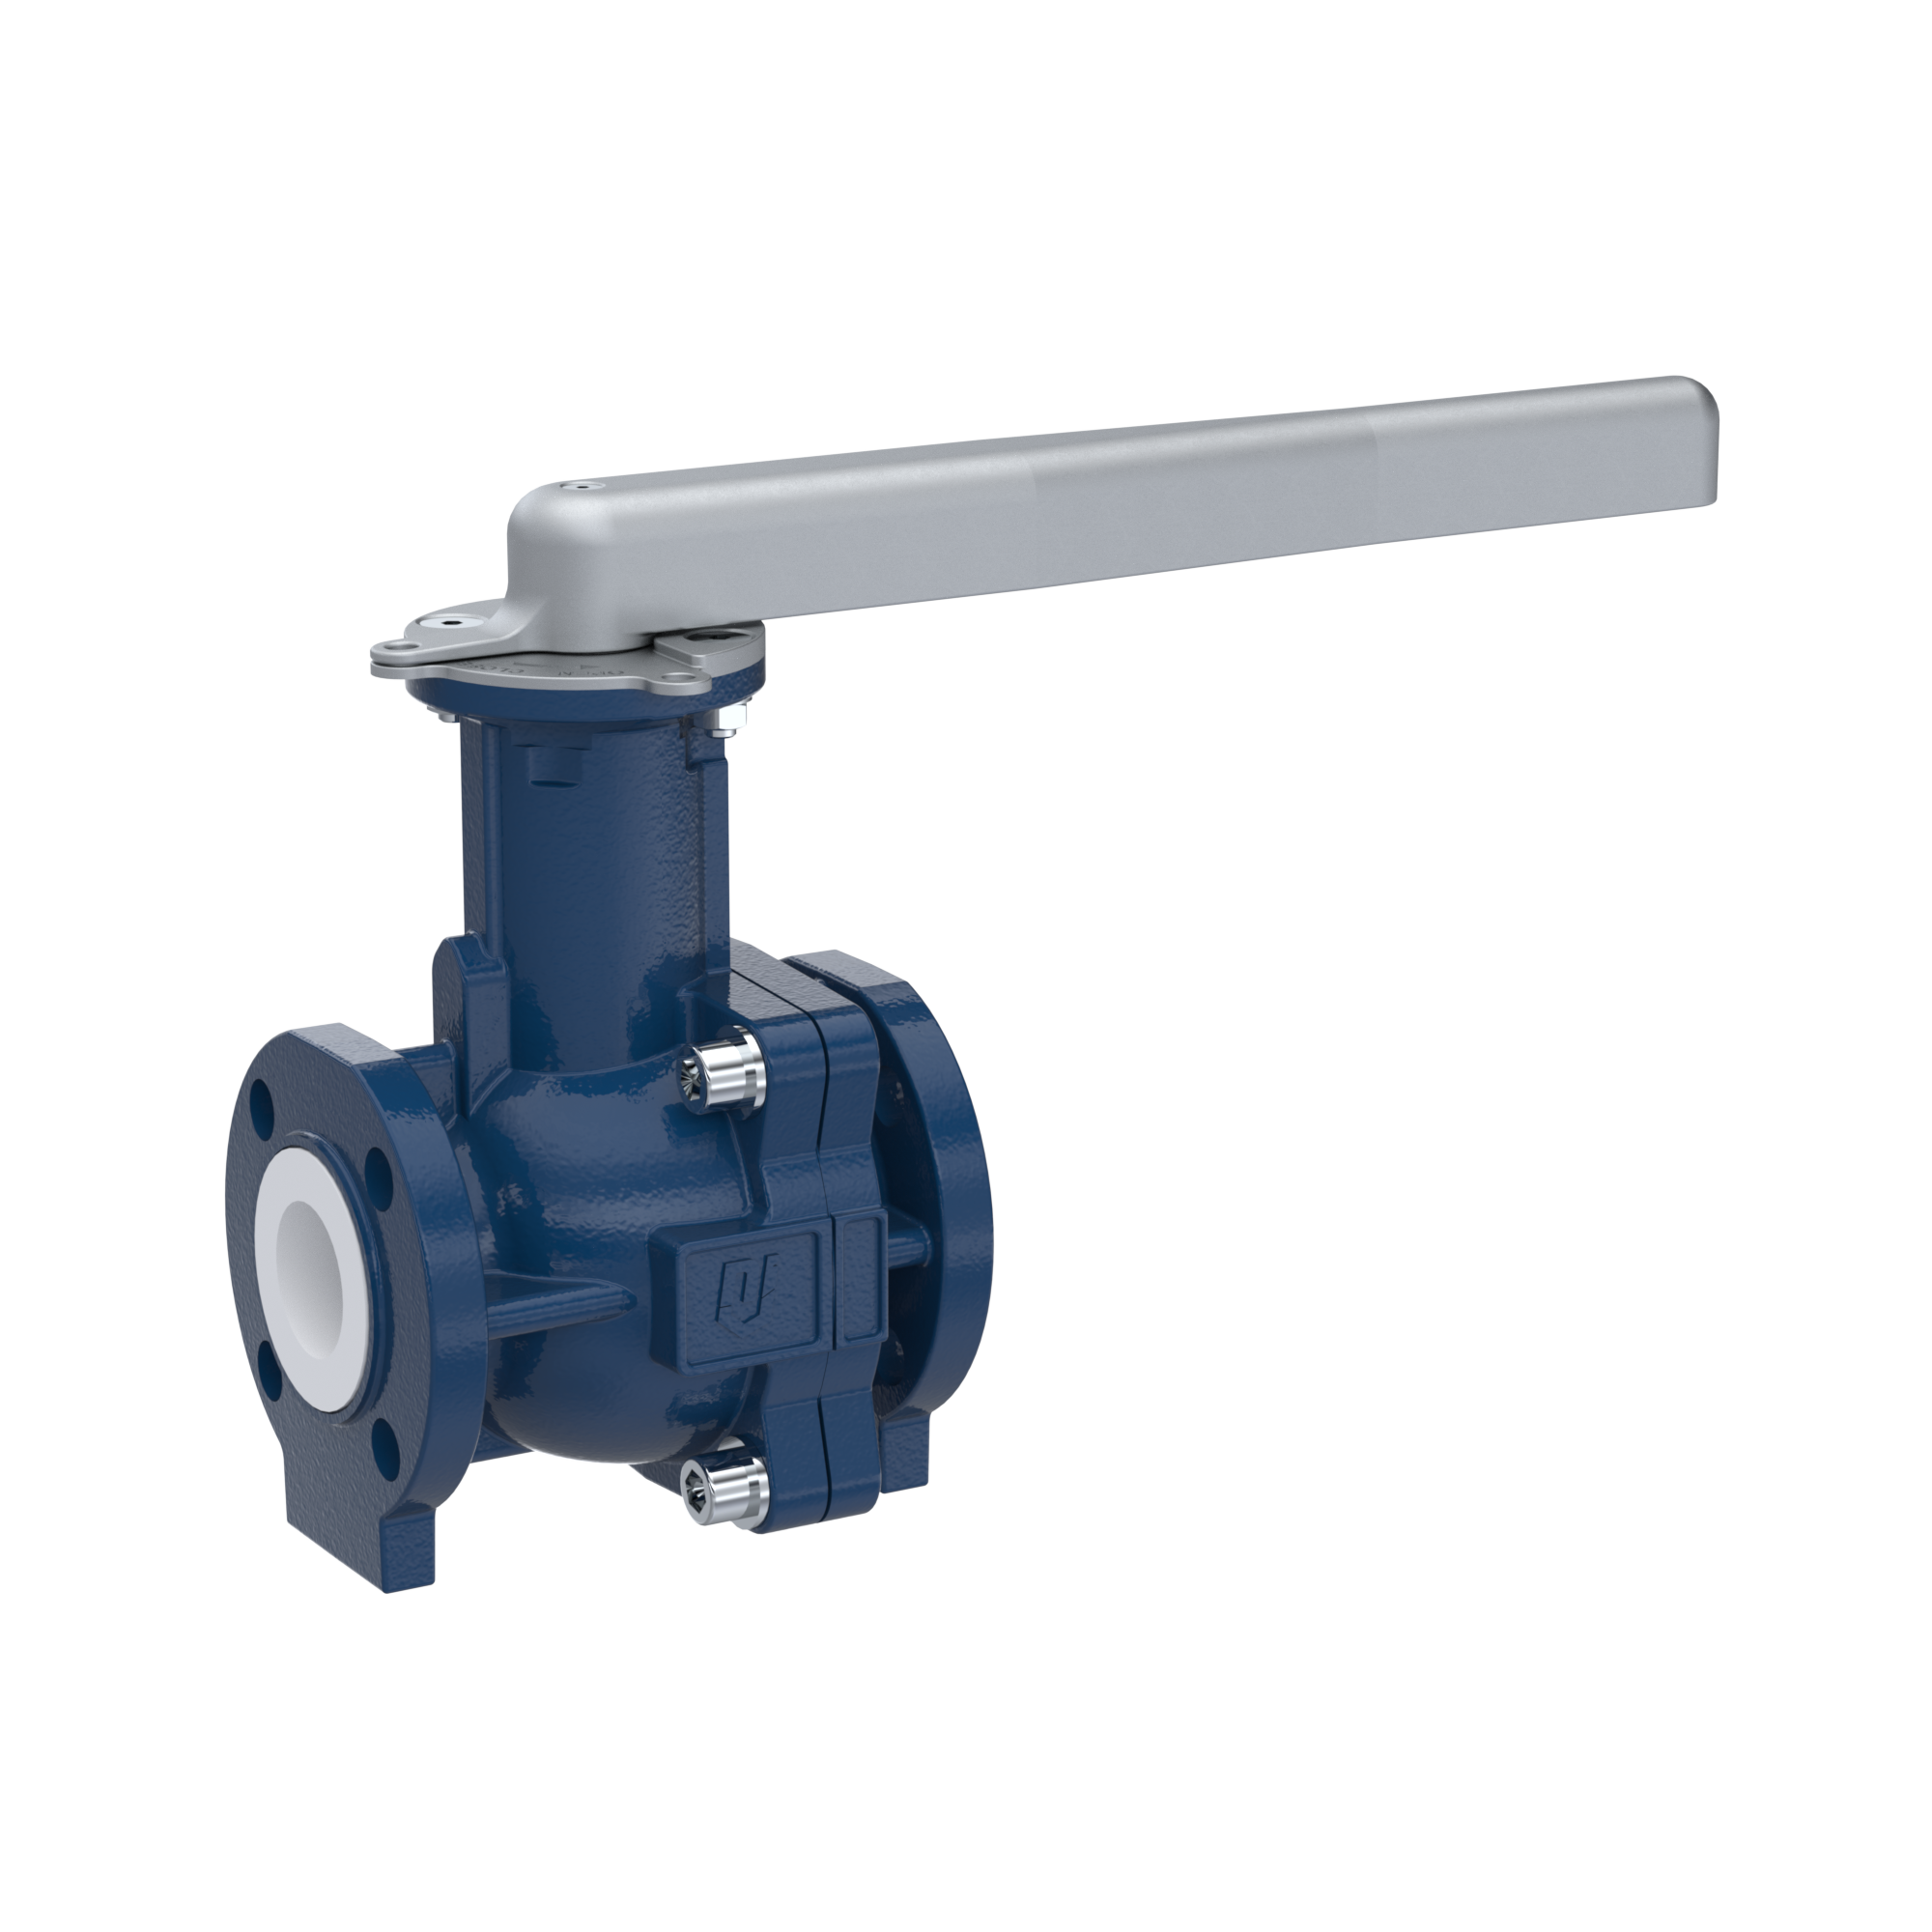 PFA-flange ball valve FK13 DN20 - 3/4" inch ANSI 150 made of spheroidal graphite cast iron with lever hand